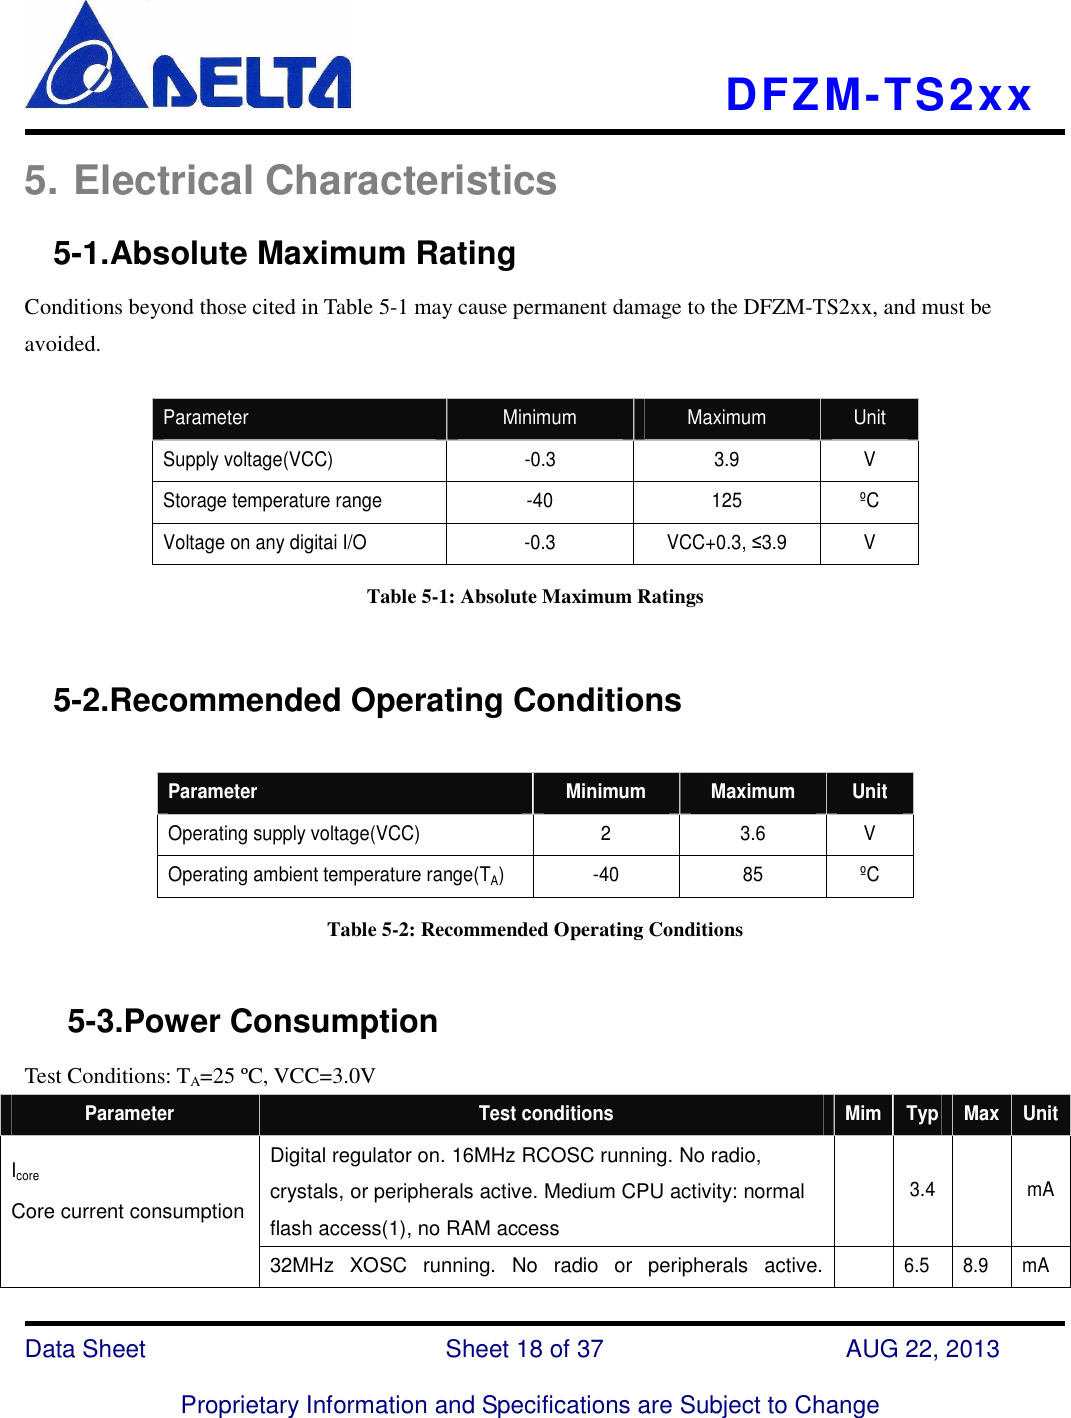    DFZM-TS2xx   Data Sheet                              Sheet 18 of 37                    AUG 22, 2013  Proprietary Information and Specifications are Subject to Change 5. Electrical Characteristics   5-1.Absolute Maximum Rating Conditions beyond those cited in Table 5-1 may cause permanent damage to the DFZM-TS2xx, and must be avoided.      Parameter  Minimum  Maximum  Unit Supply voltage(VCC)  -0.3  3.9  V Storage temperature range  -40  125  ºC   Voltage on any digitai I/O  -0.3  VCC+0.3, ≤3.9  V Table 5-1: Absolute Maximum Ratings     5-2.Recommended Operating Conditions  Parameter  Minimum  Maximum  Unit Operating supply voltage(VCC)  2  3.6  V Operating ambient temperature range(TA)  -40  85  ºC Table 5-2: Recommended Operating Conditions       5-3.Power Consumption Test Conditions: TA=25 ºC, VCC=3.0V Parameter  Test conditions  Mim Typ Max Unit Digital regulator on. 16MHz RCOSC running. No radio, crystals, or peripherals active. Medium CPU activity: normal flash access(1), no RAM access   3.4   mA Icore      Core current consumption 32MHz  XOSC  running.  No  radio  or  peripherals  active.   6.5  8.9  mA 